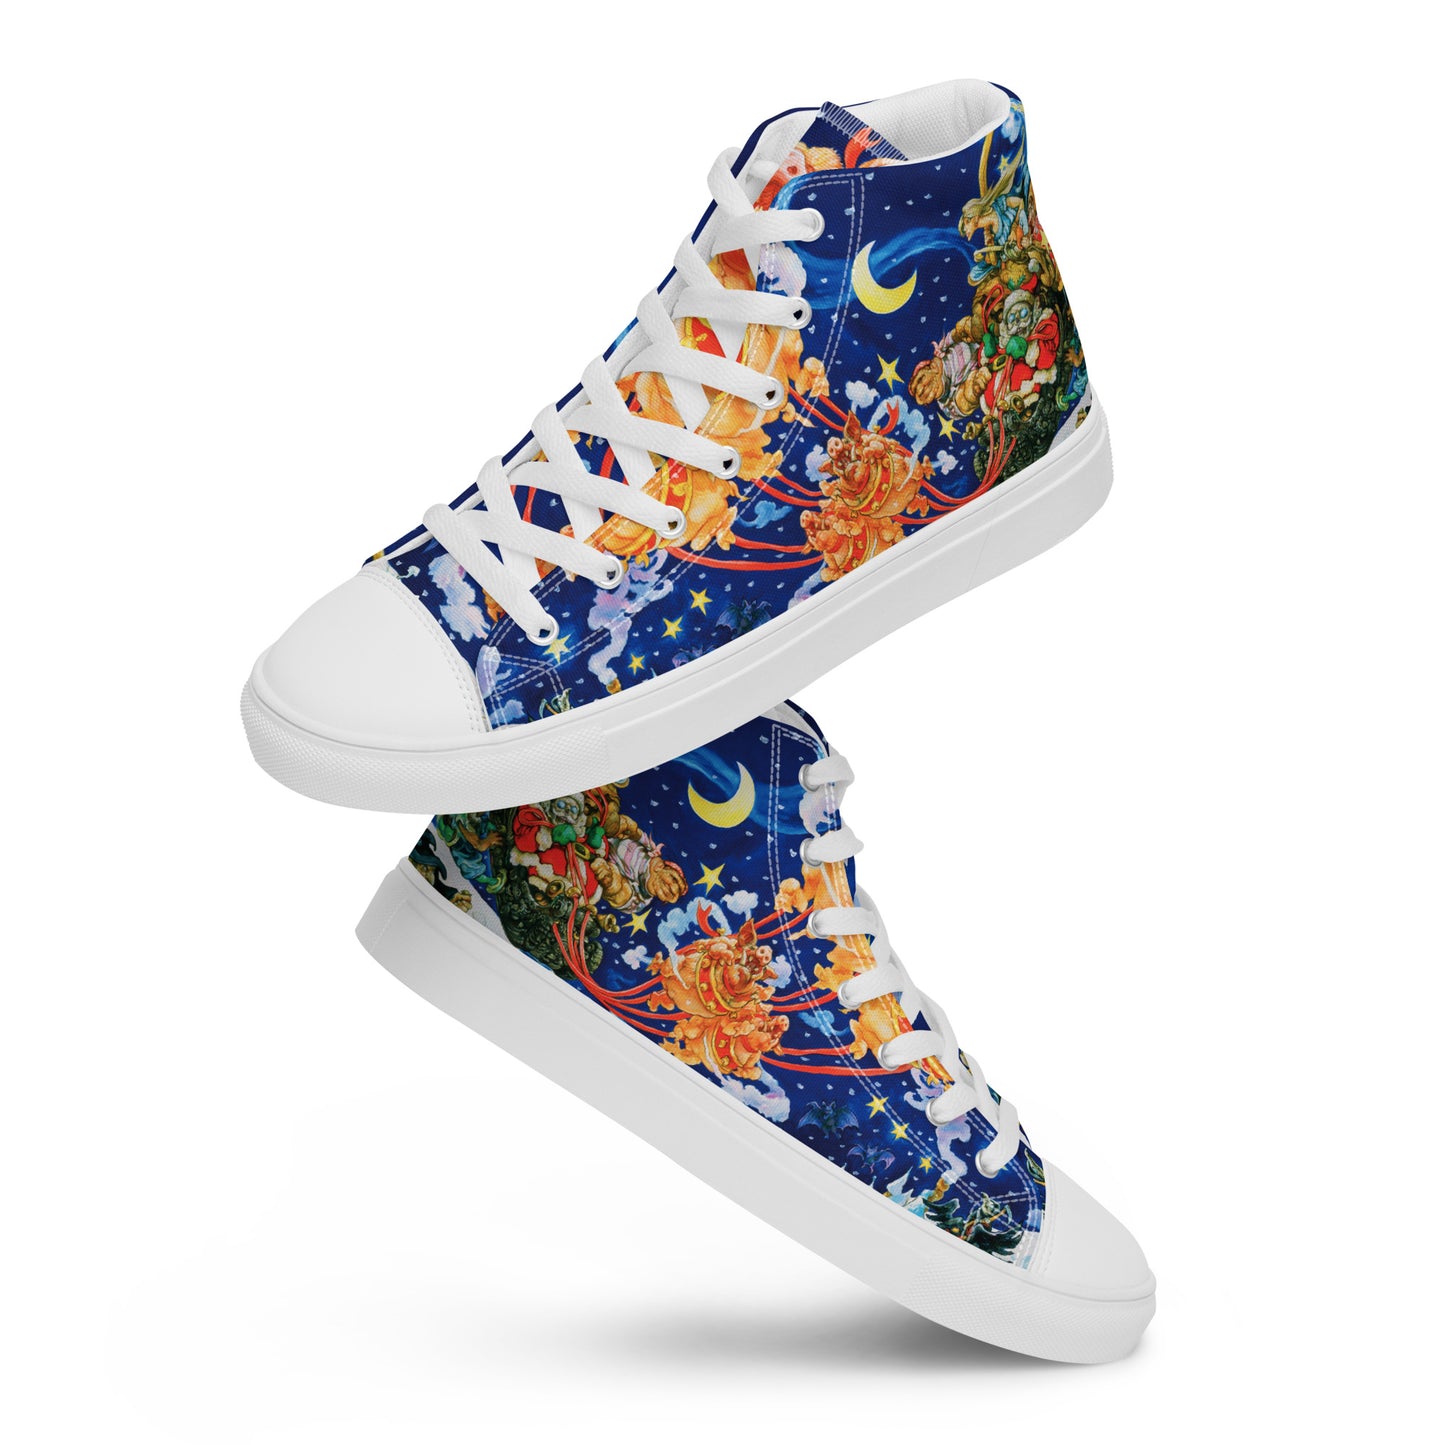 Men’s Hogfather High Top Canvas Shoes - Free Shipping *US SIZES SHOWN! USE CHART!